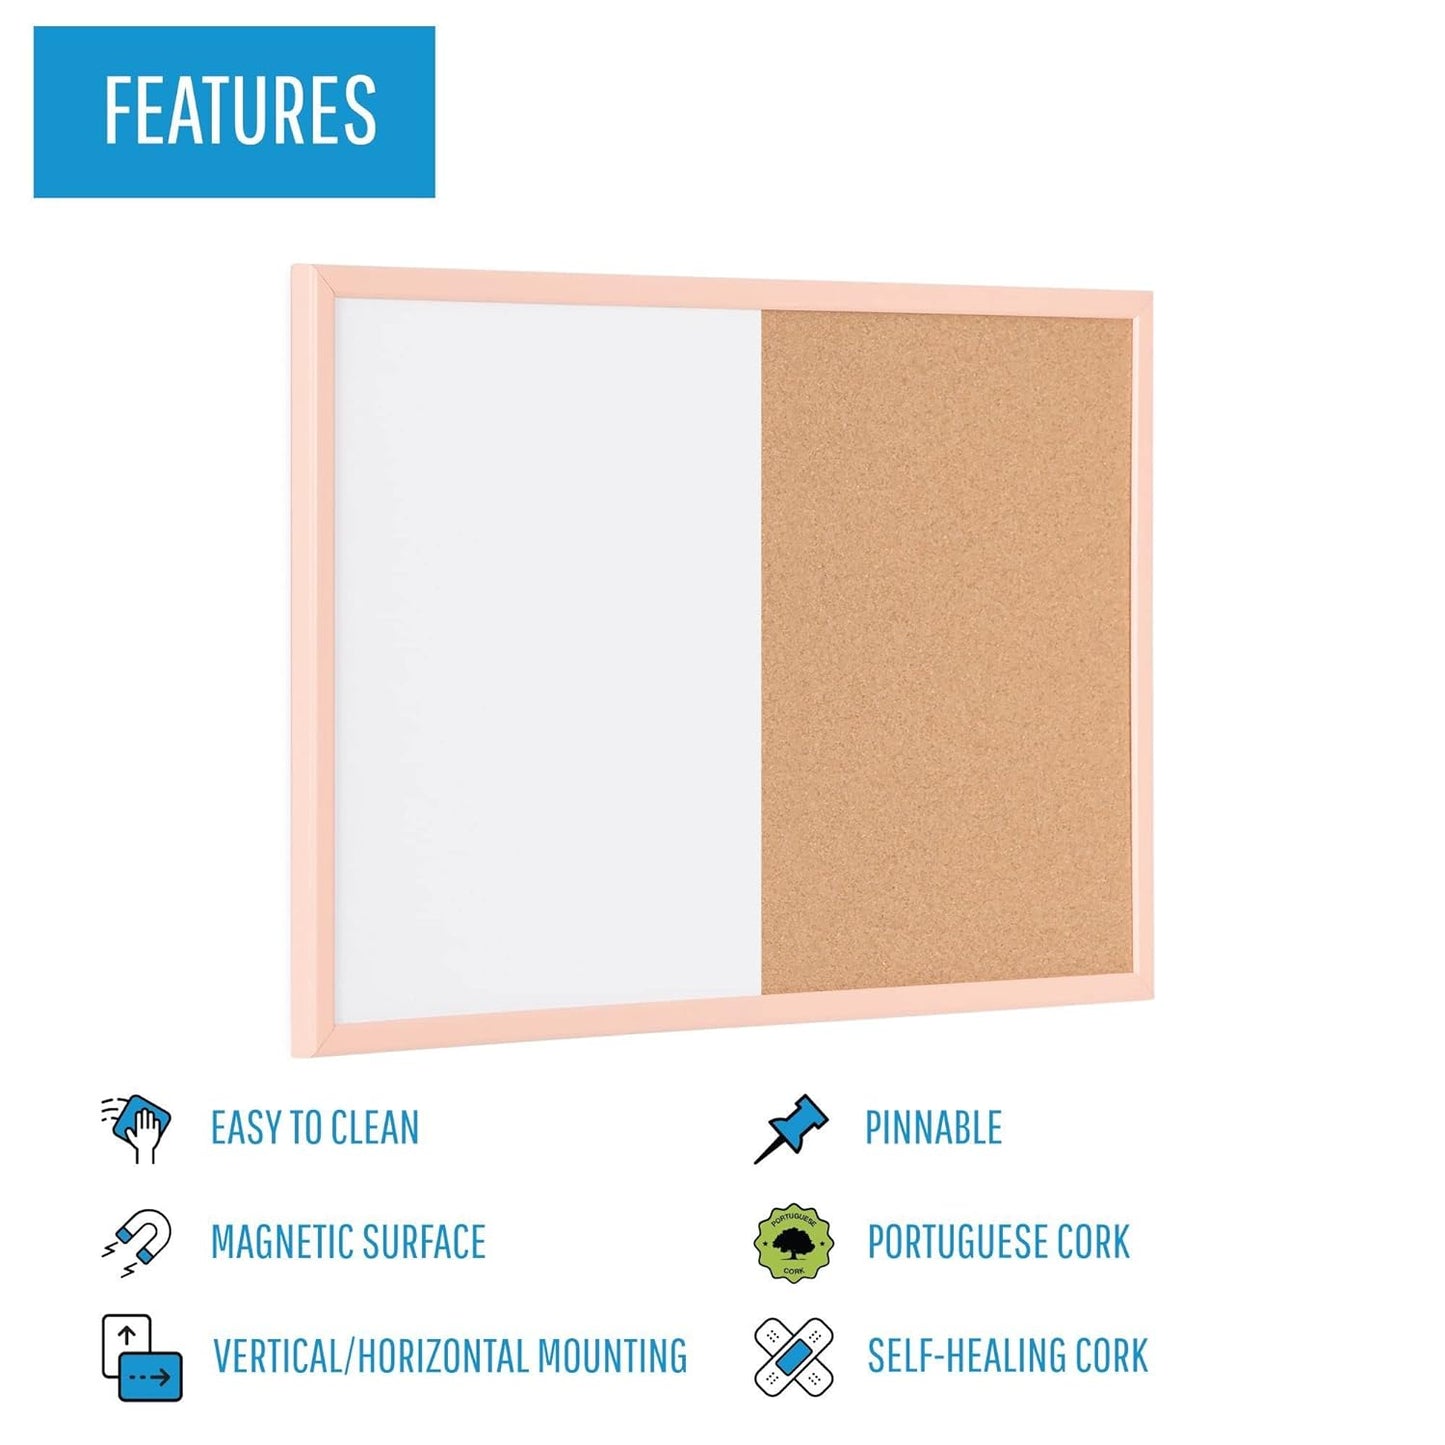 MasterVision Pastel Collection Combo Dry Erase Whiteboard/Cork Bulletin Board, Salmon Colored MDF Frame, 35.43" x 23.62"